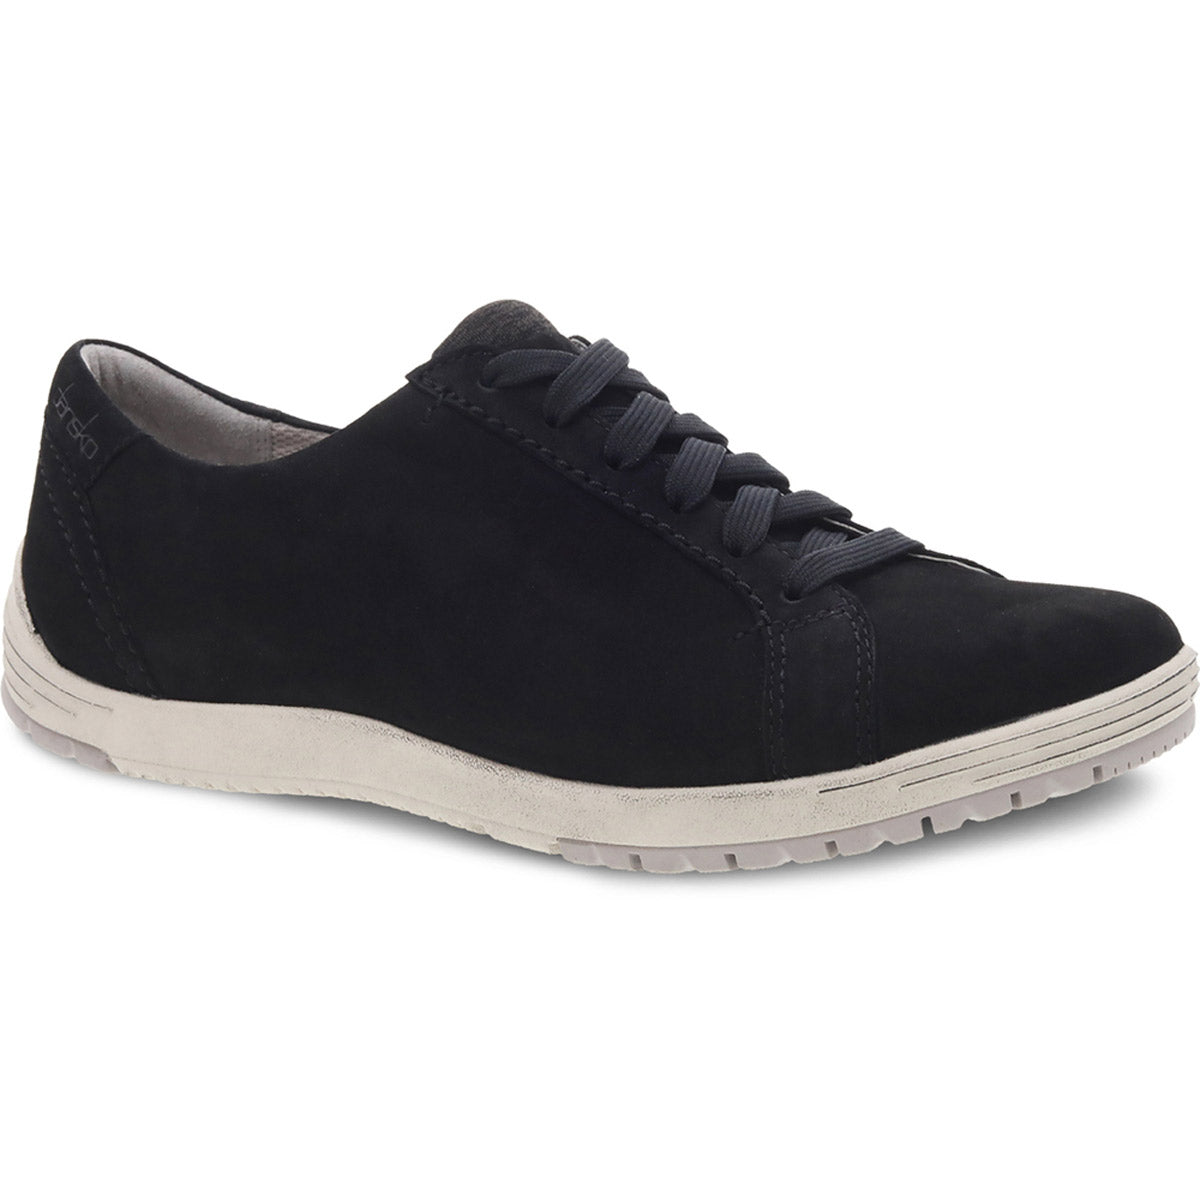 Dansko black waterproof nubuck casual shoe with laces and arch support.